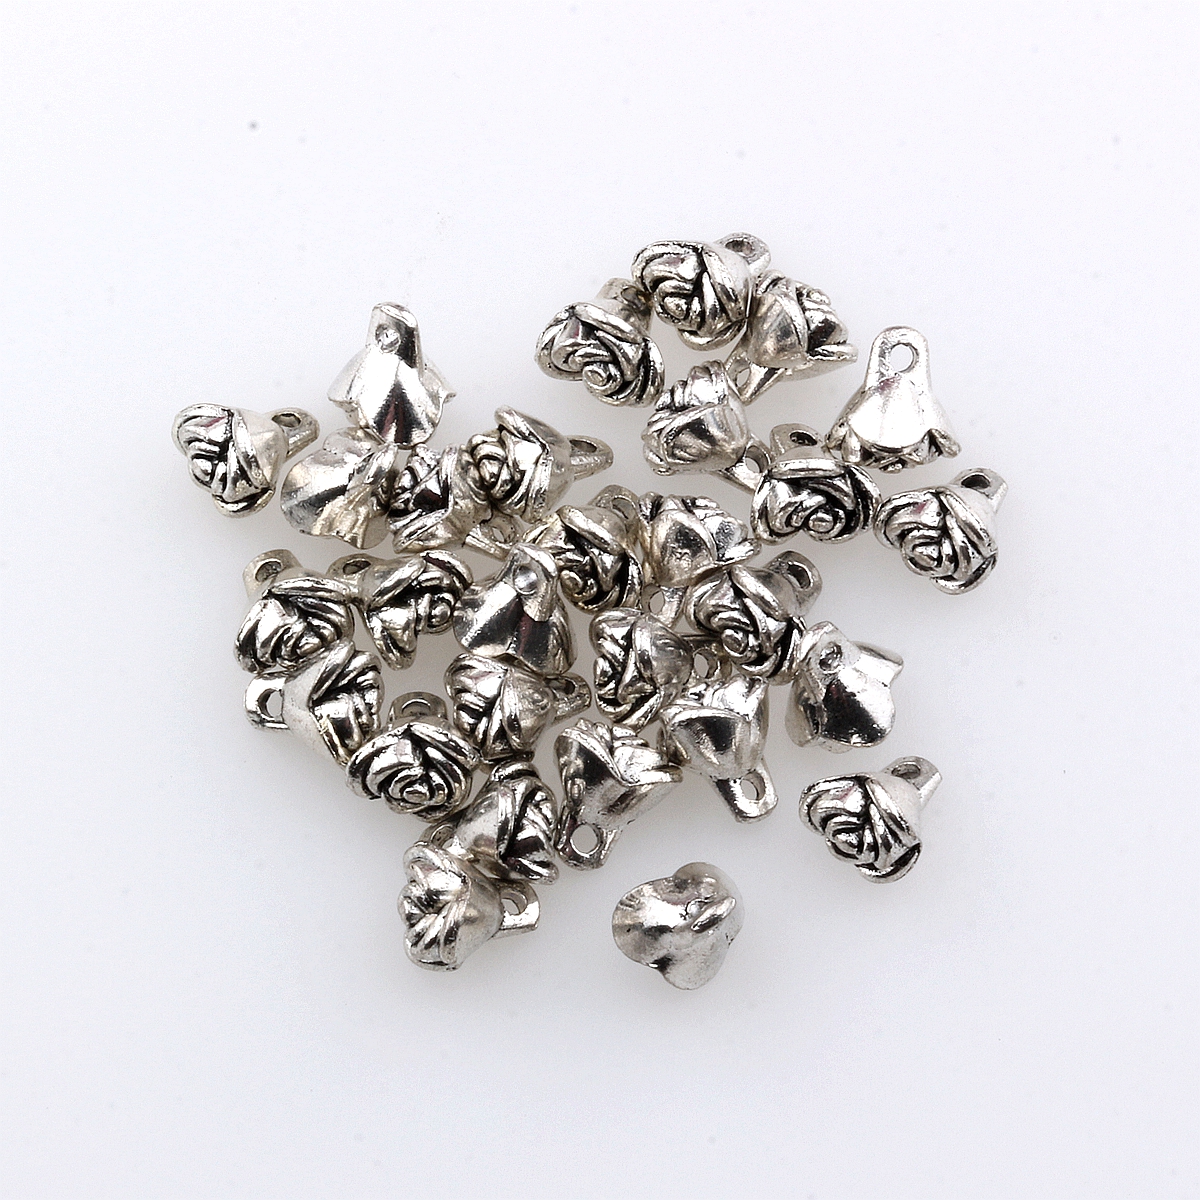 Antique Silver Flowers Charms Pendants For Jewelry Making DIY Handmade Craft